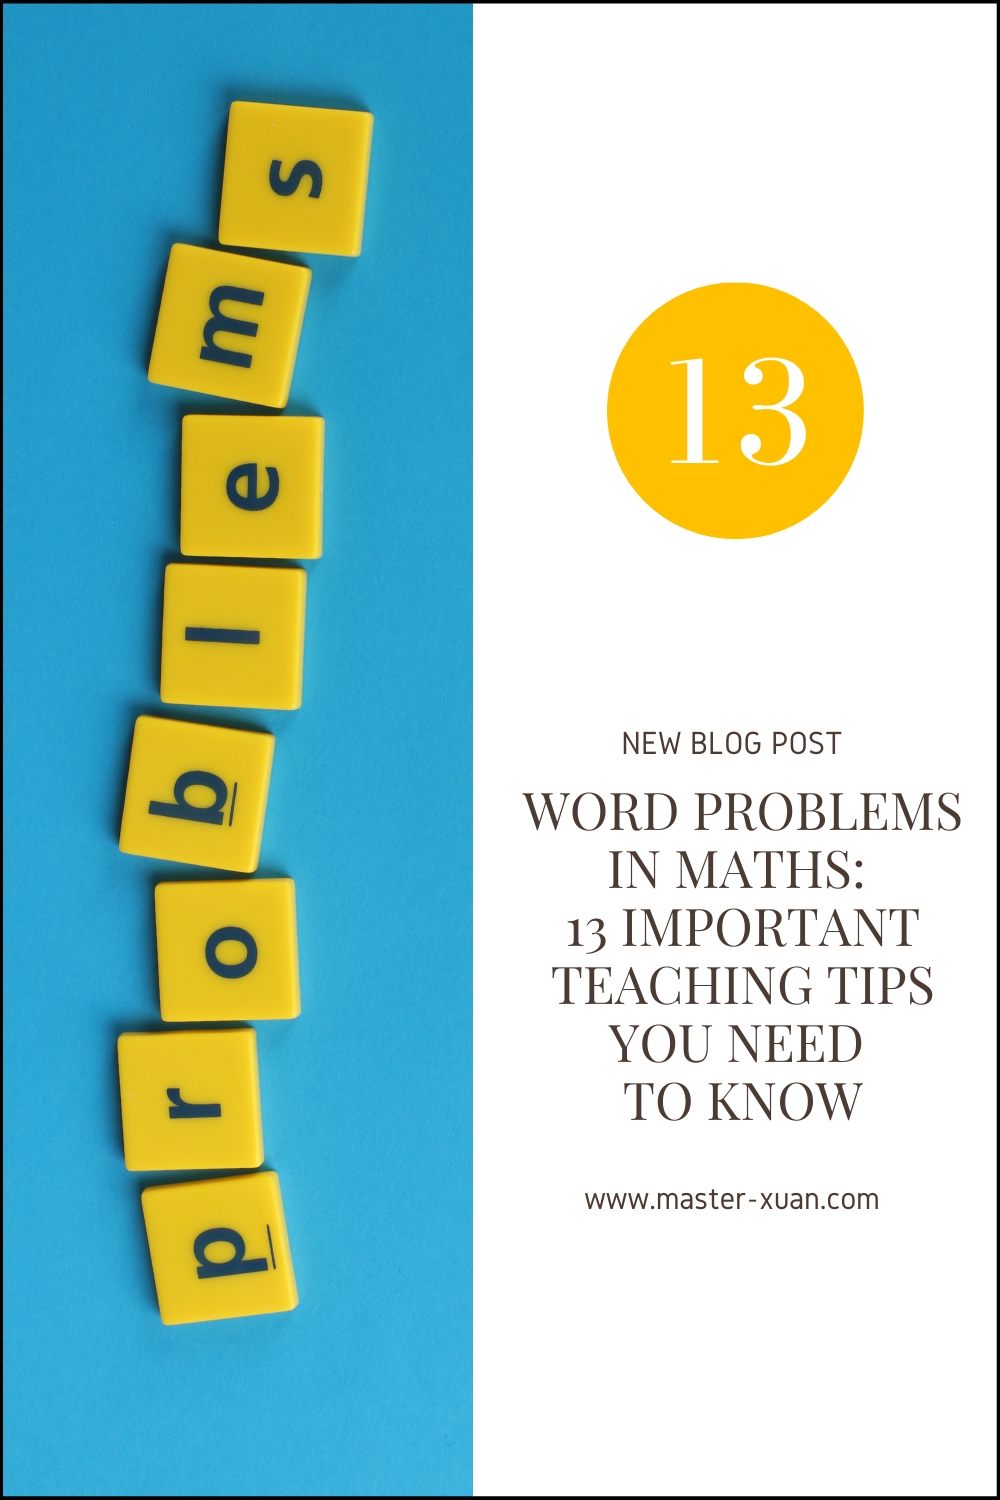 word-problems-in-maths-13-important-teaching-tips-you-need-to-know